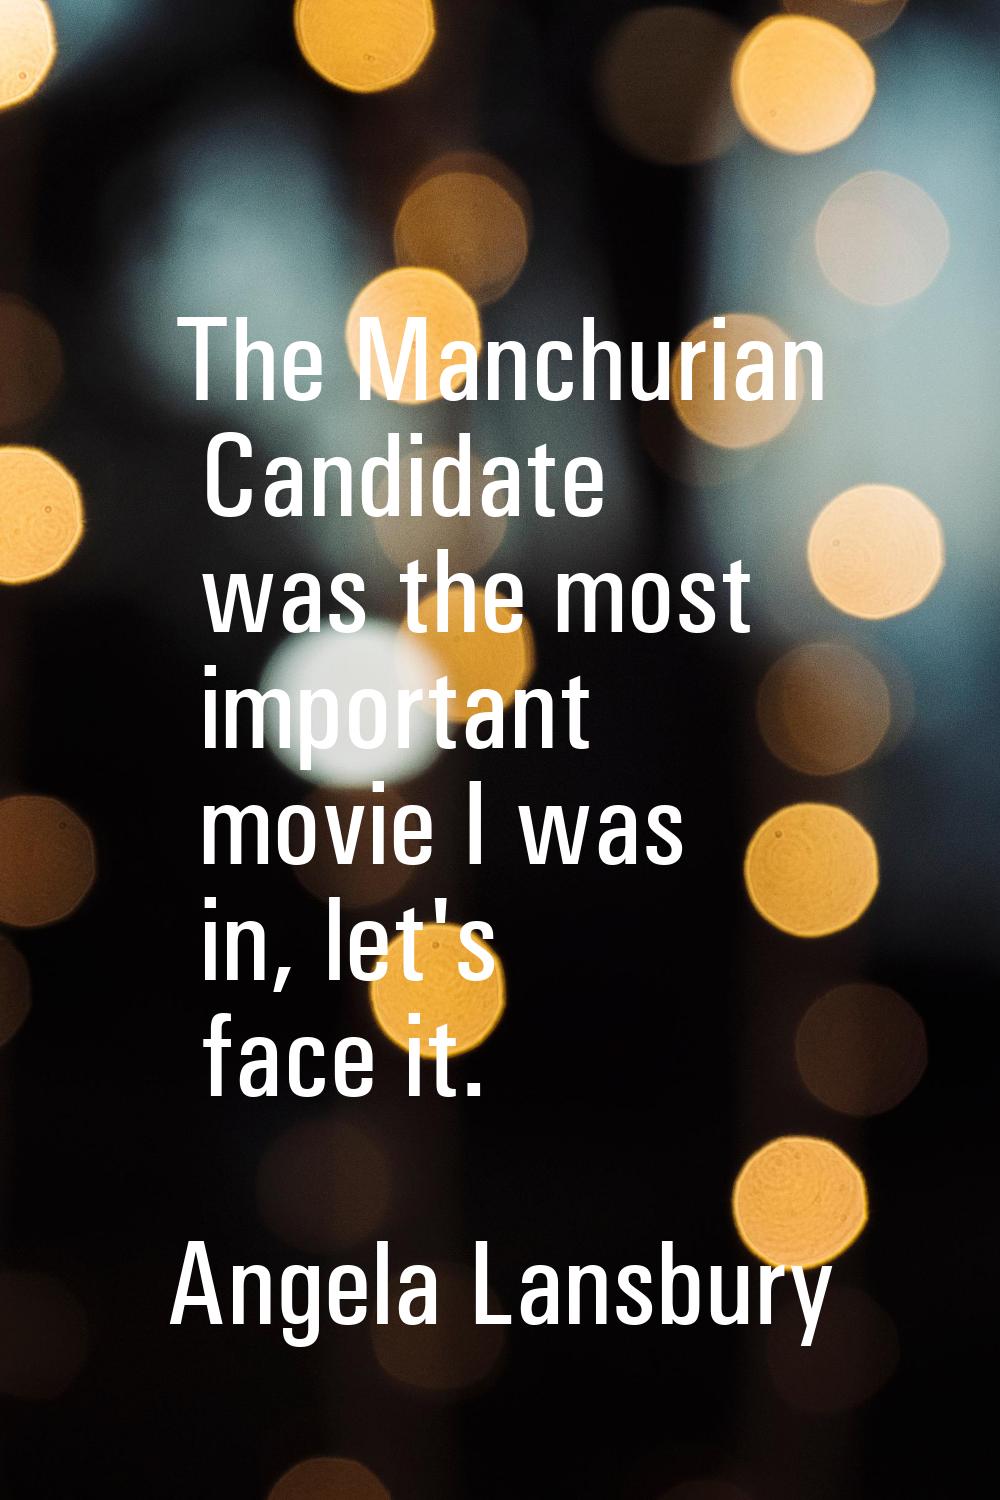 The Manchurian Candidate was the most important movie I was in, let's face it.